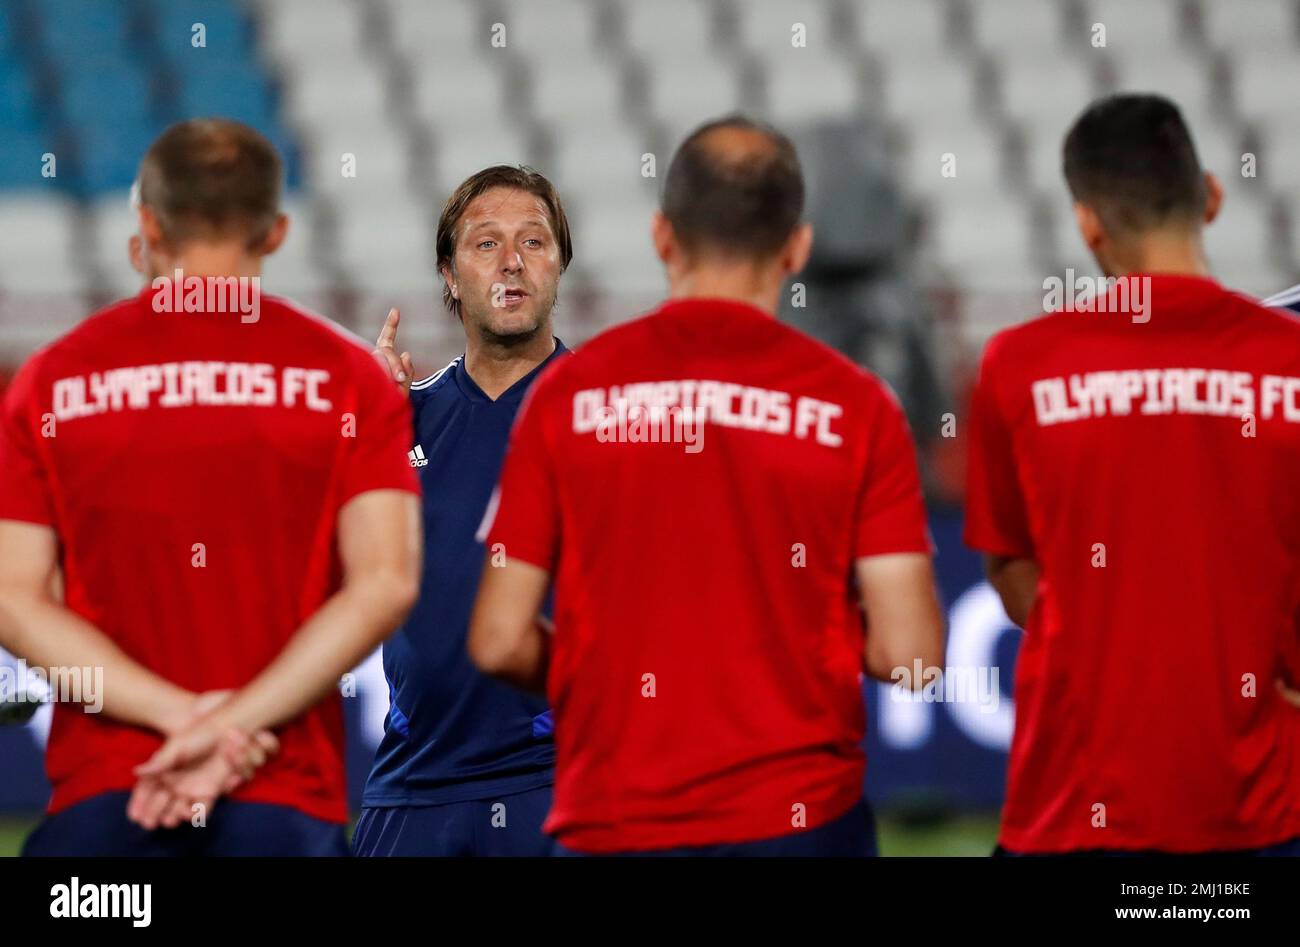 Olympiakos' head coach Pedro Martins, second left, gives instructions to  his players during a training session prior to the Champions League group B  soccer match between Red Star and Olympiacos, in Belgrade,